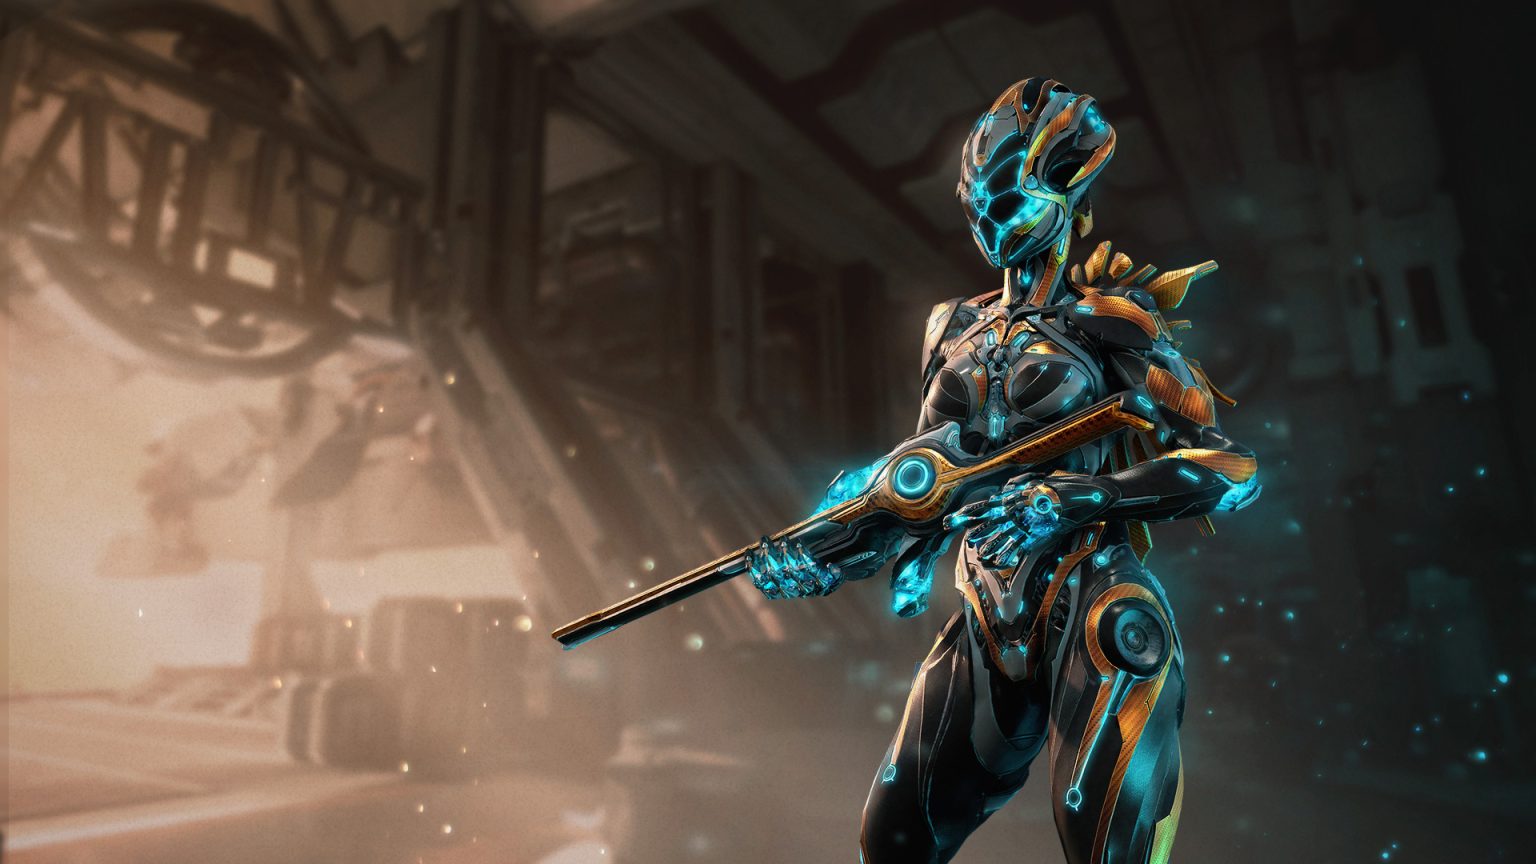 How to Farm Argon Crystal in Warframe 2022 Guide